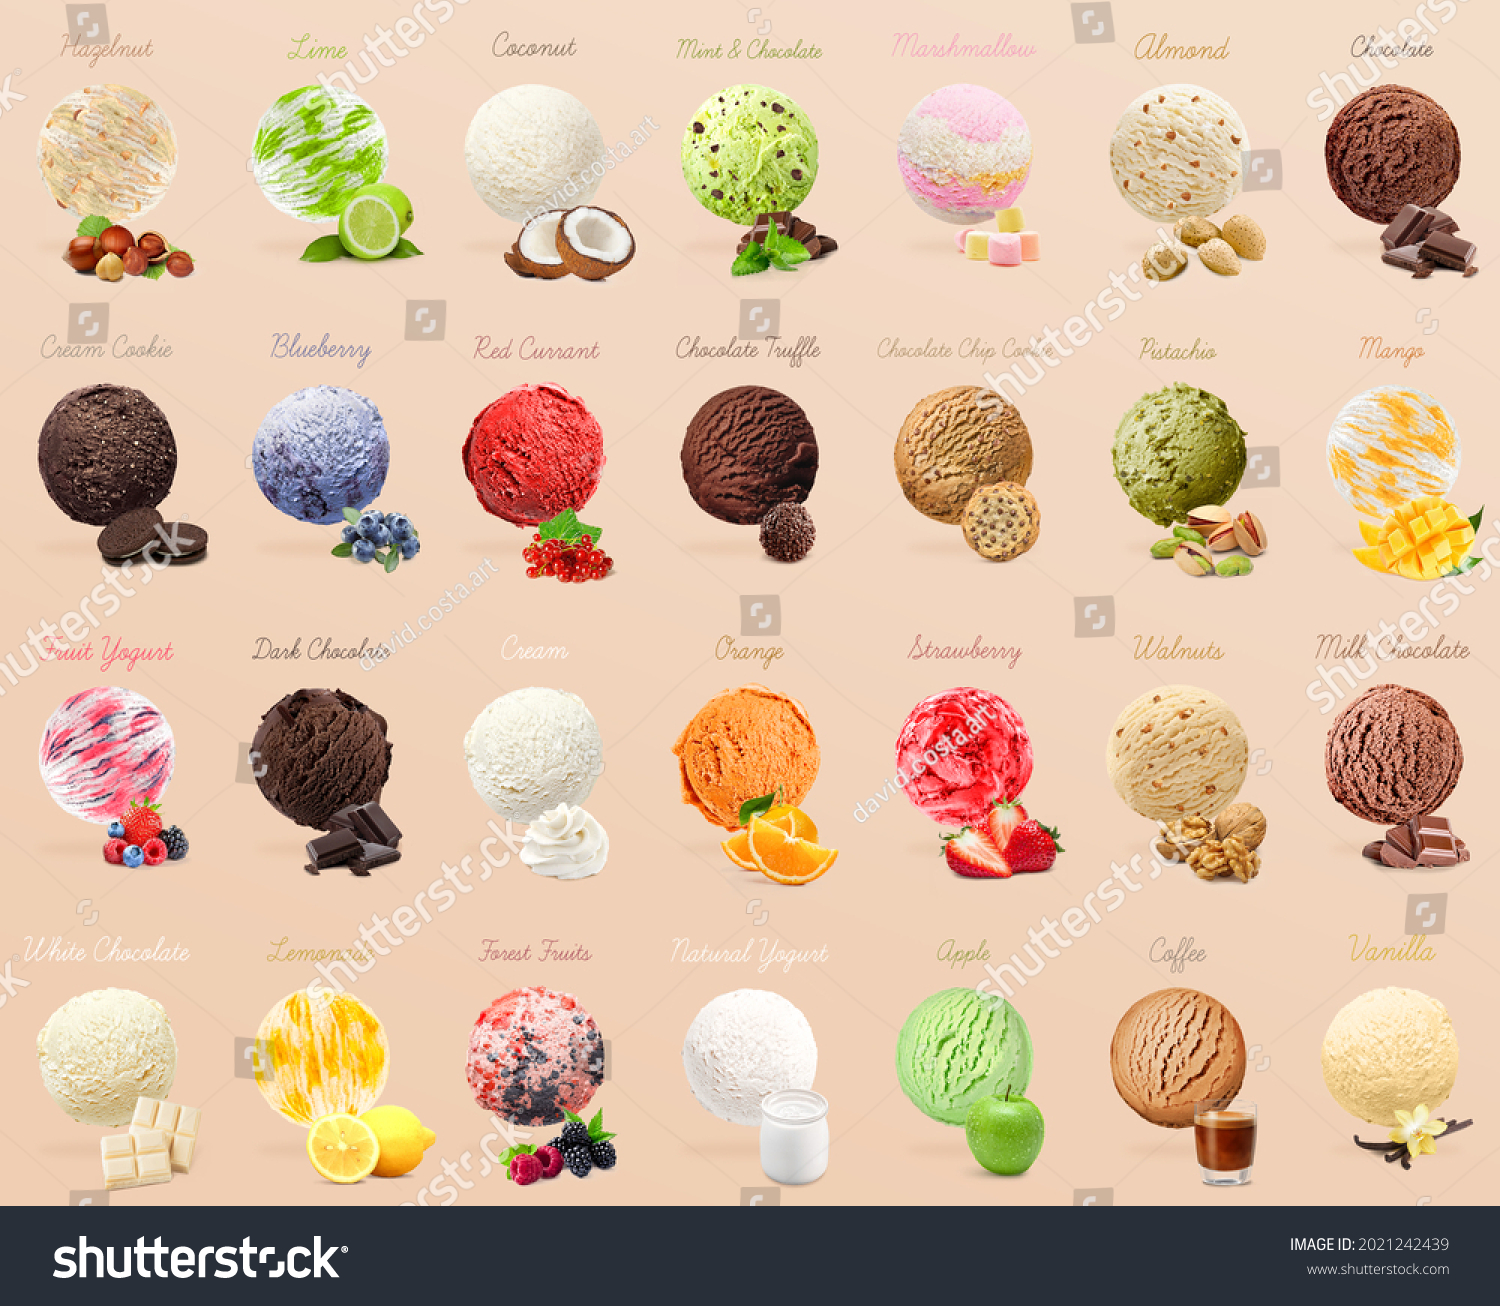 Set of ice creams with different flavors. Ice cream menu with scoops. Hazelnut, lime, coconut, mint chocolate, marshmallow, almond,  cream, blueberry, red currant, truffle, chip cookie, pistachio, man #2021242439